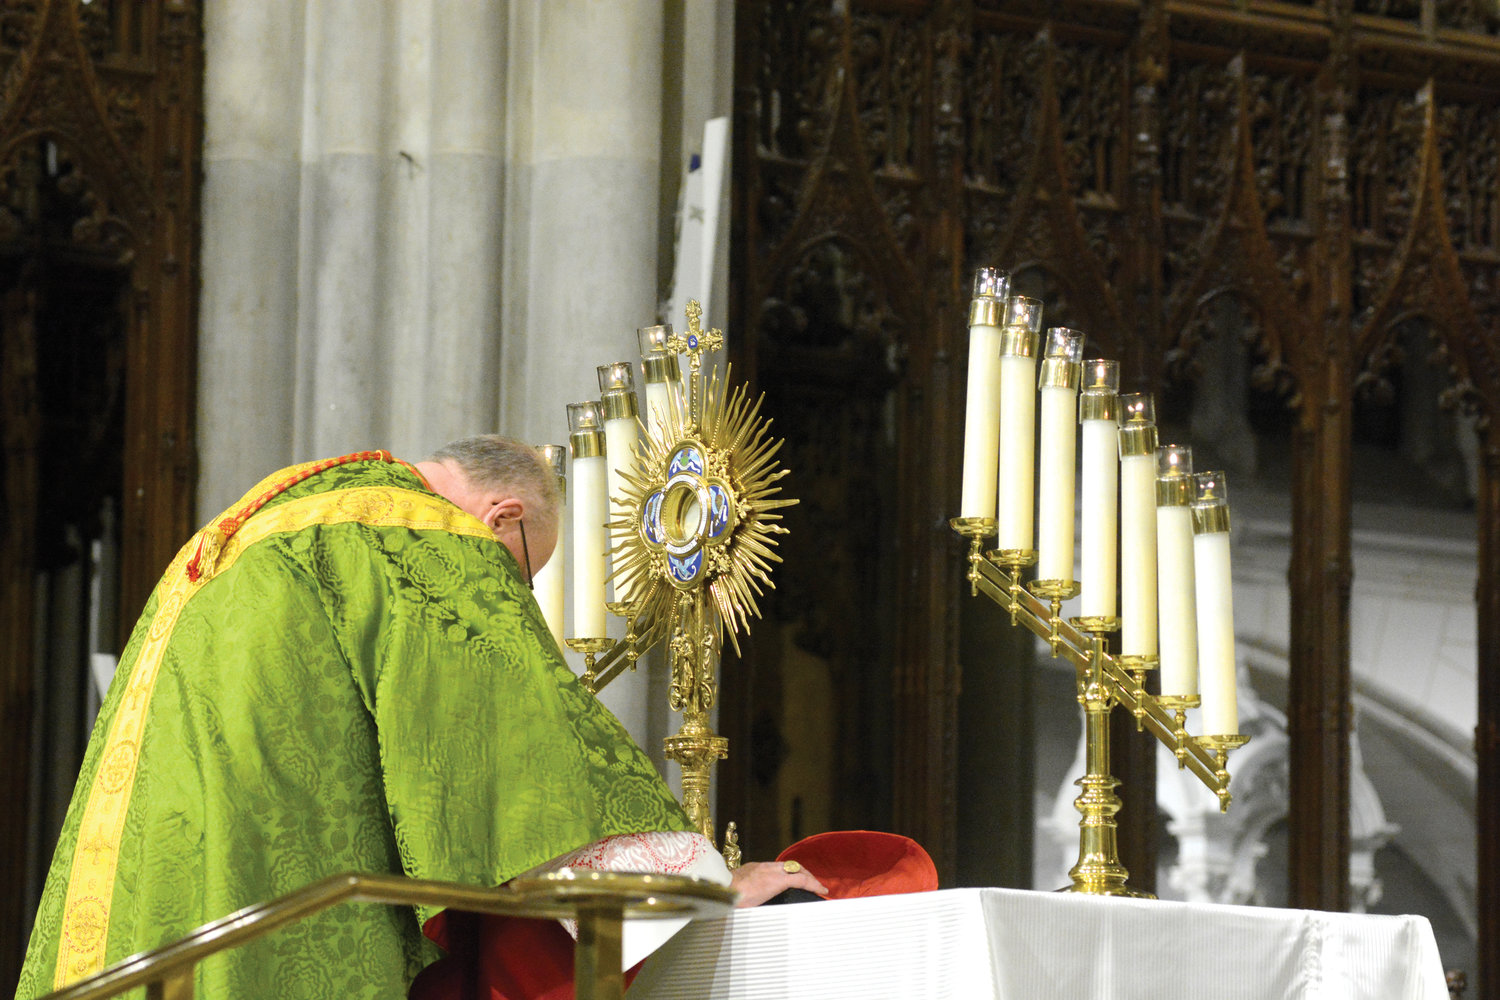 Cardinal Dolan bows in Adoration before the Blessed Sacrament after celebrating Mass Jan. 22, the Day of Prayer for the Legal Protection of Unborn Children, at St. Patrick’s Cathedral. A Holy Hour followed the Mass, which was sponsored by the archdiocesan Respect Life Office.